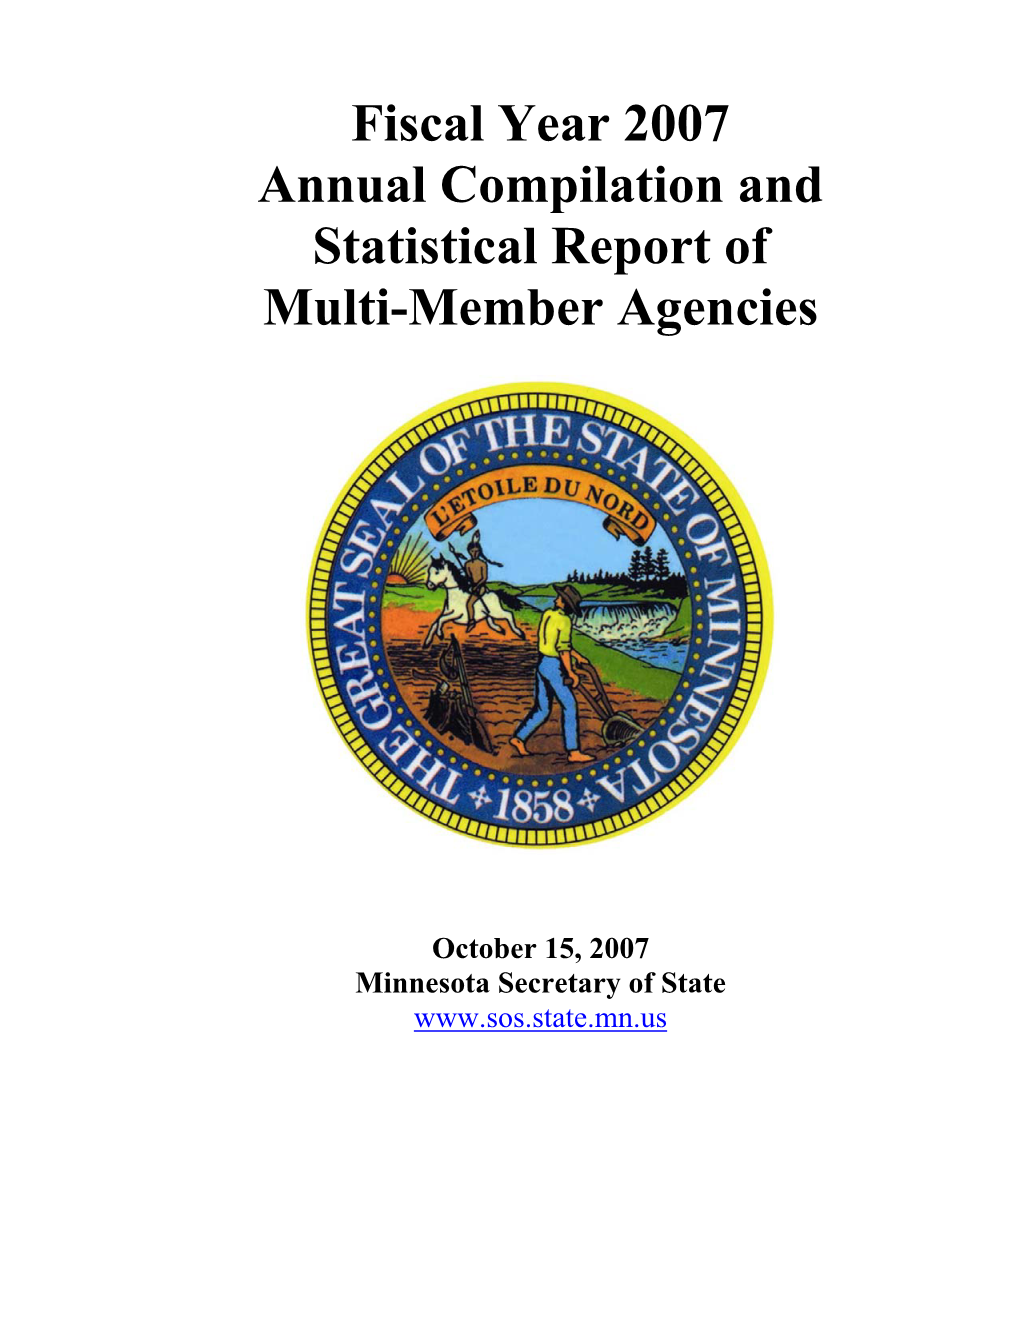 Fiscal Year 2007 Annual Compilation and Statistical Report of Multi-Member Agencies